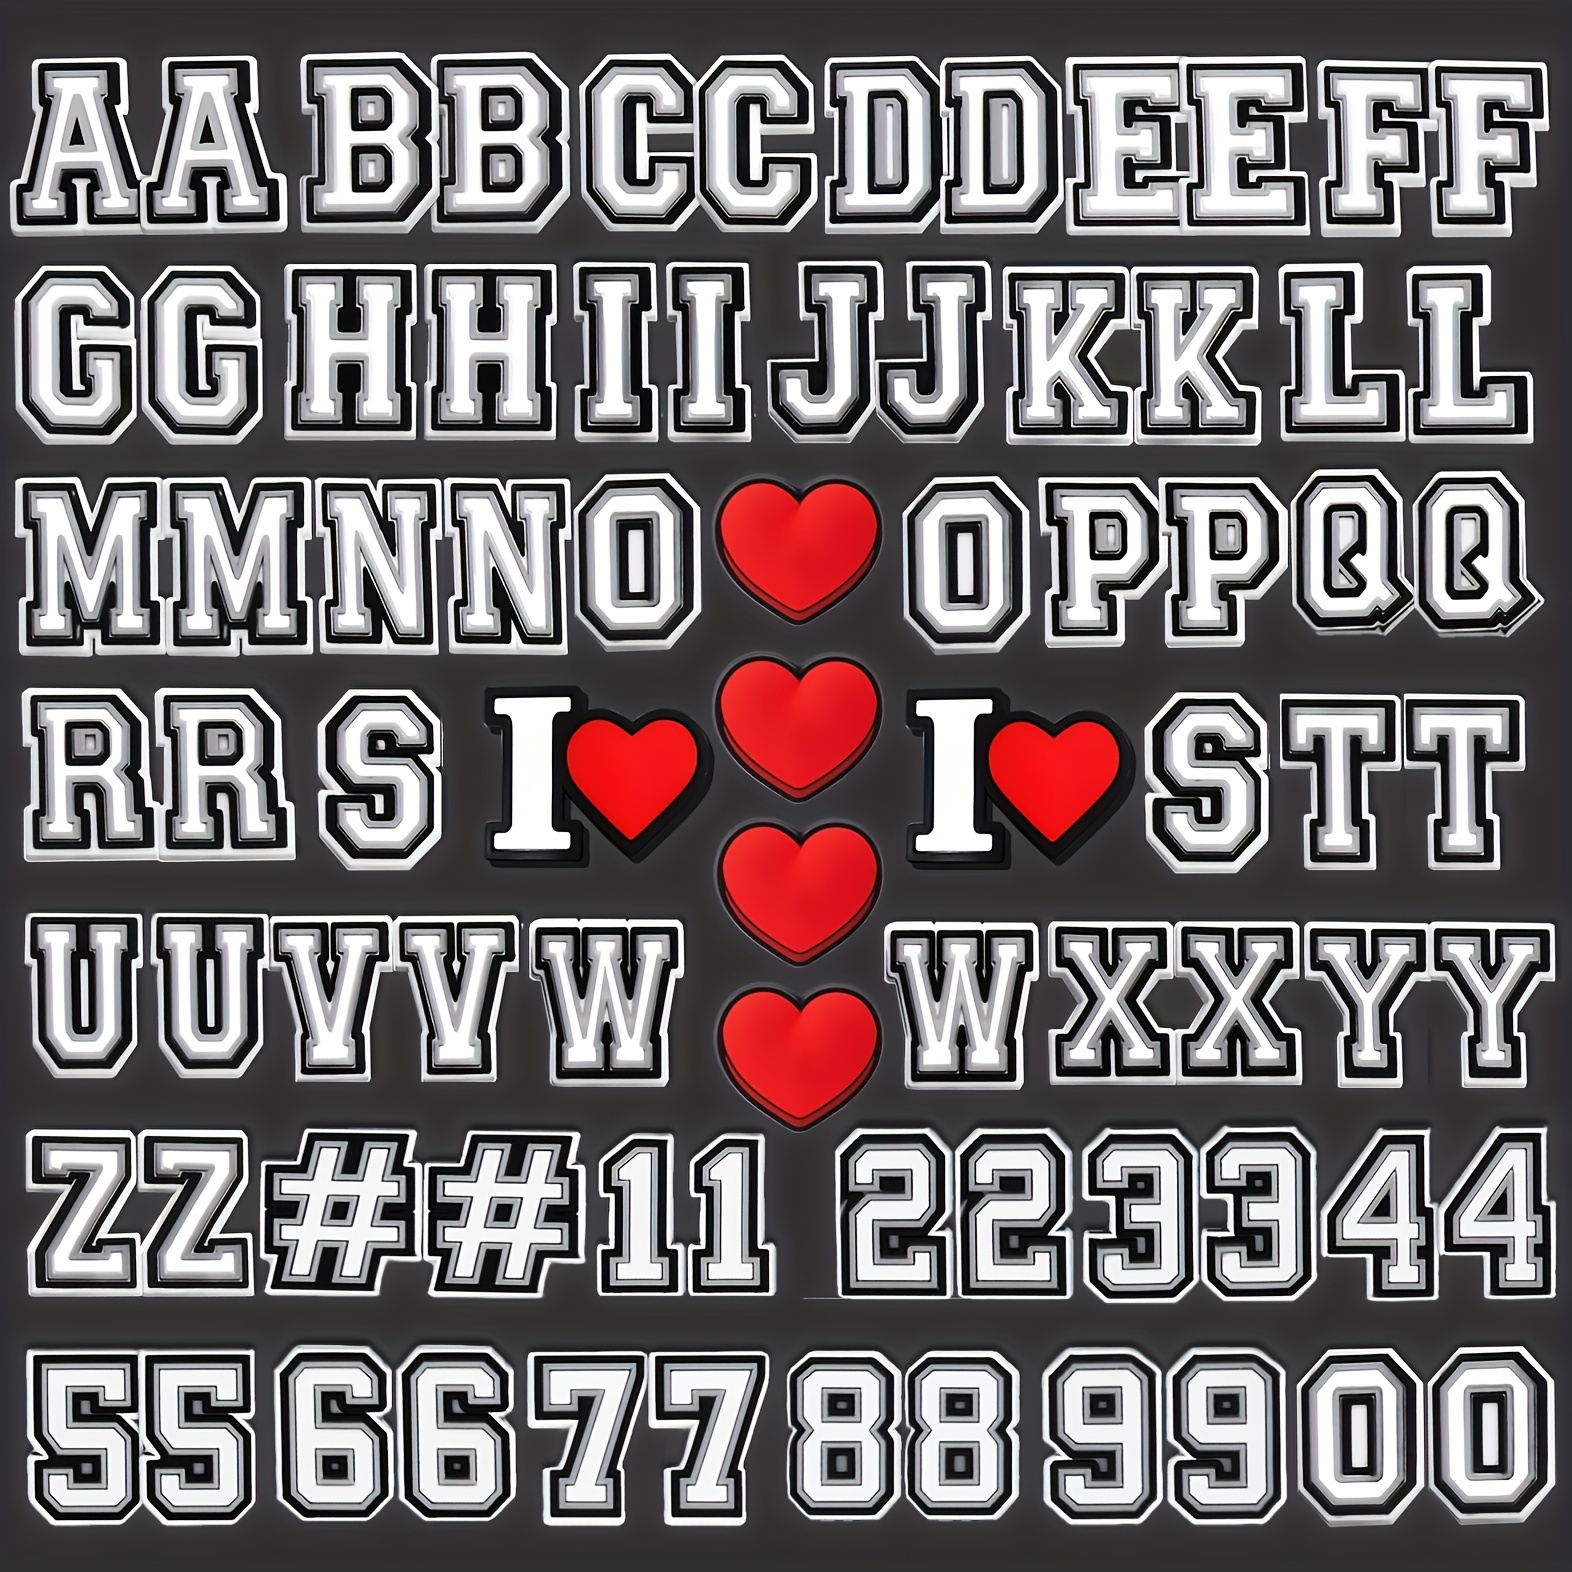 56pcs Double Letter Shoe Charms for Crocs, Alphabet Gibits Charms with 'I Heart' and Hashtag Symbols for Sandals Decorations, Letter Croc Charms